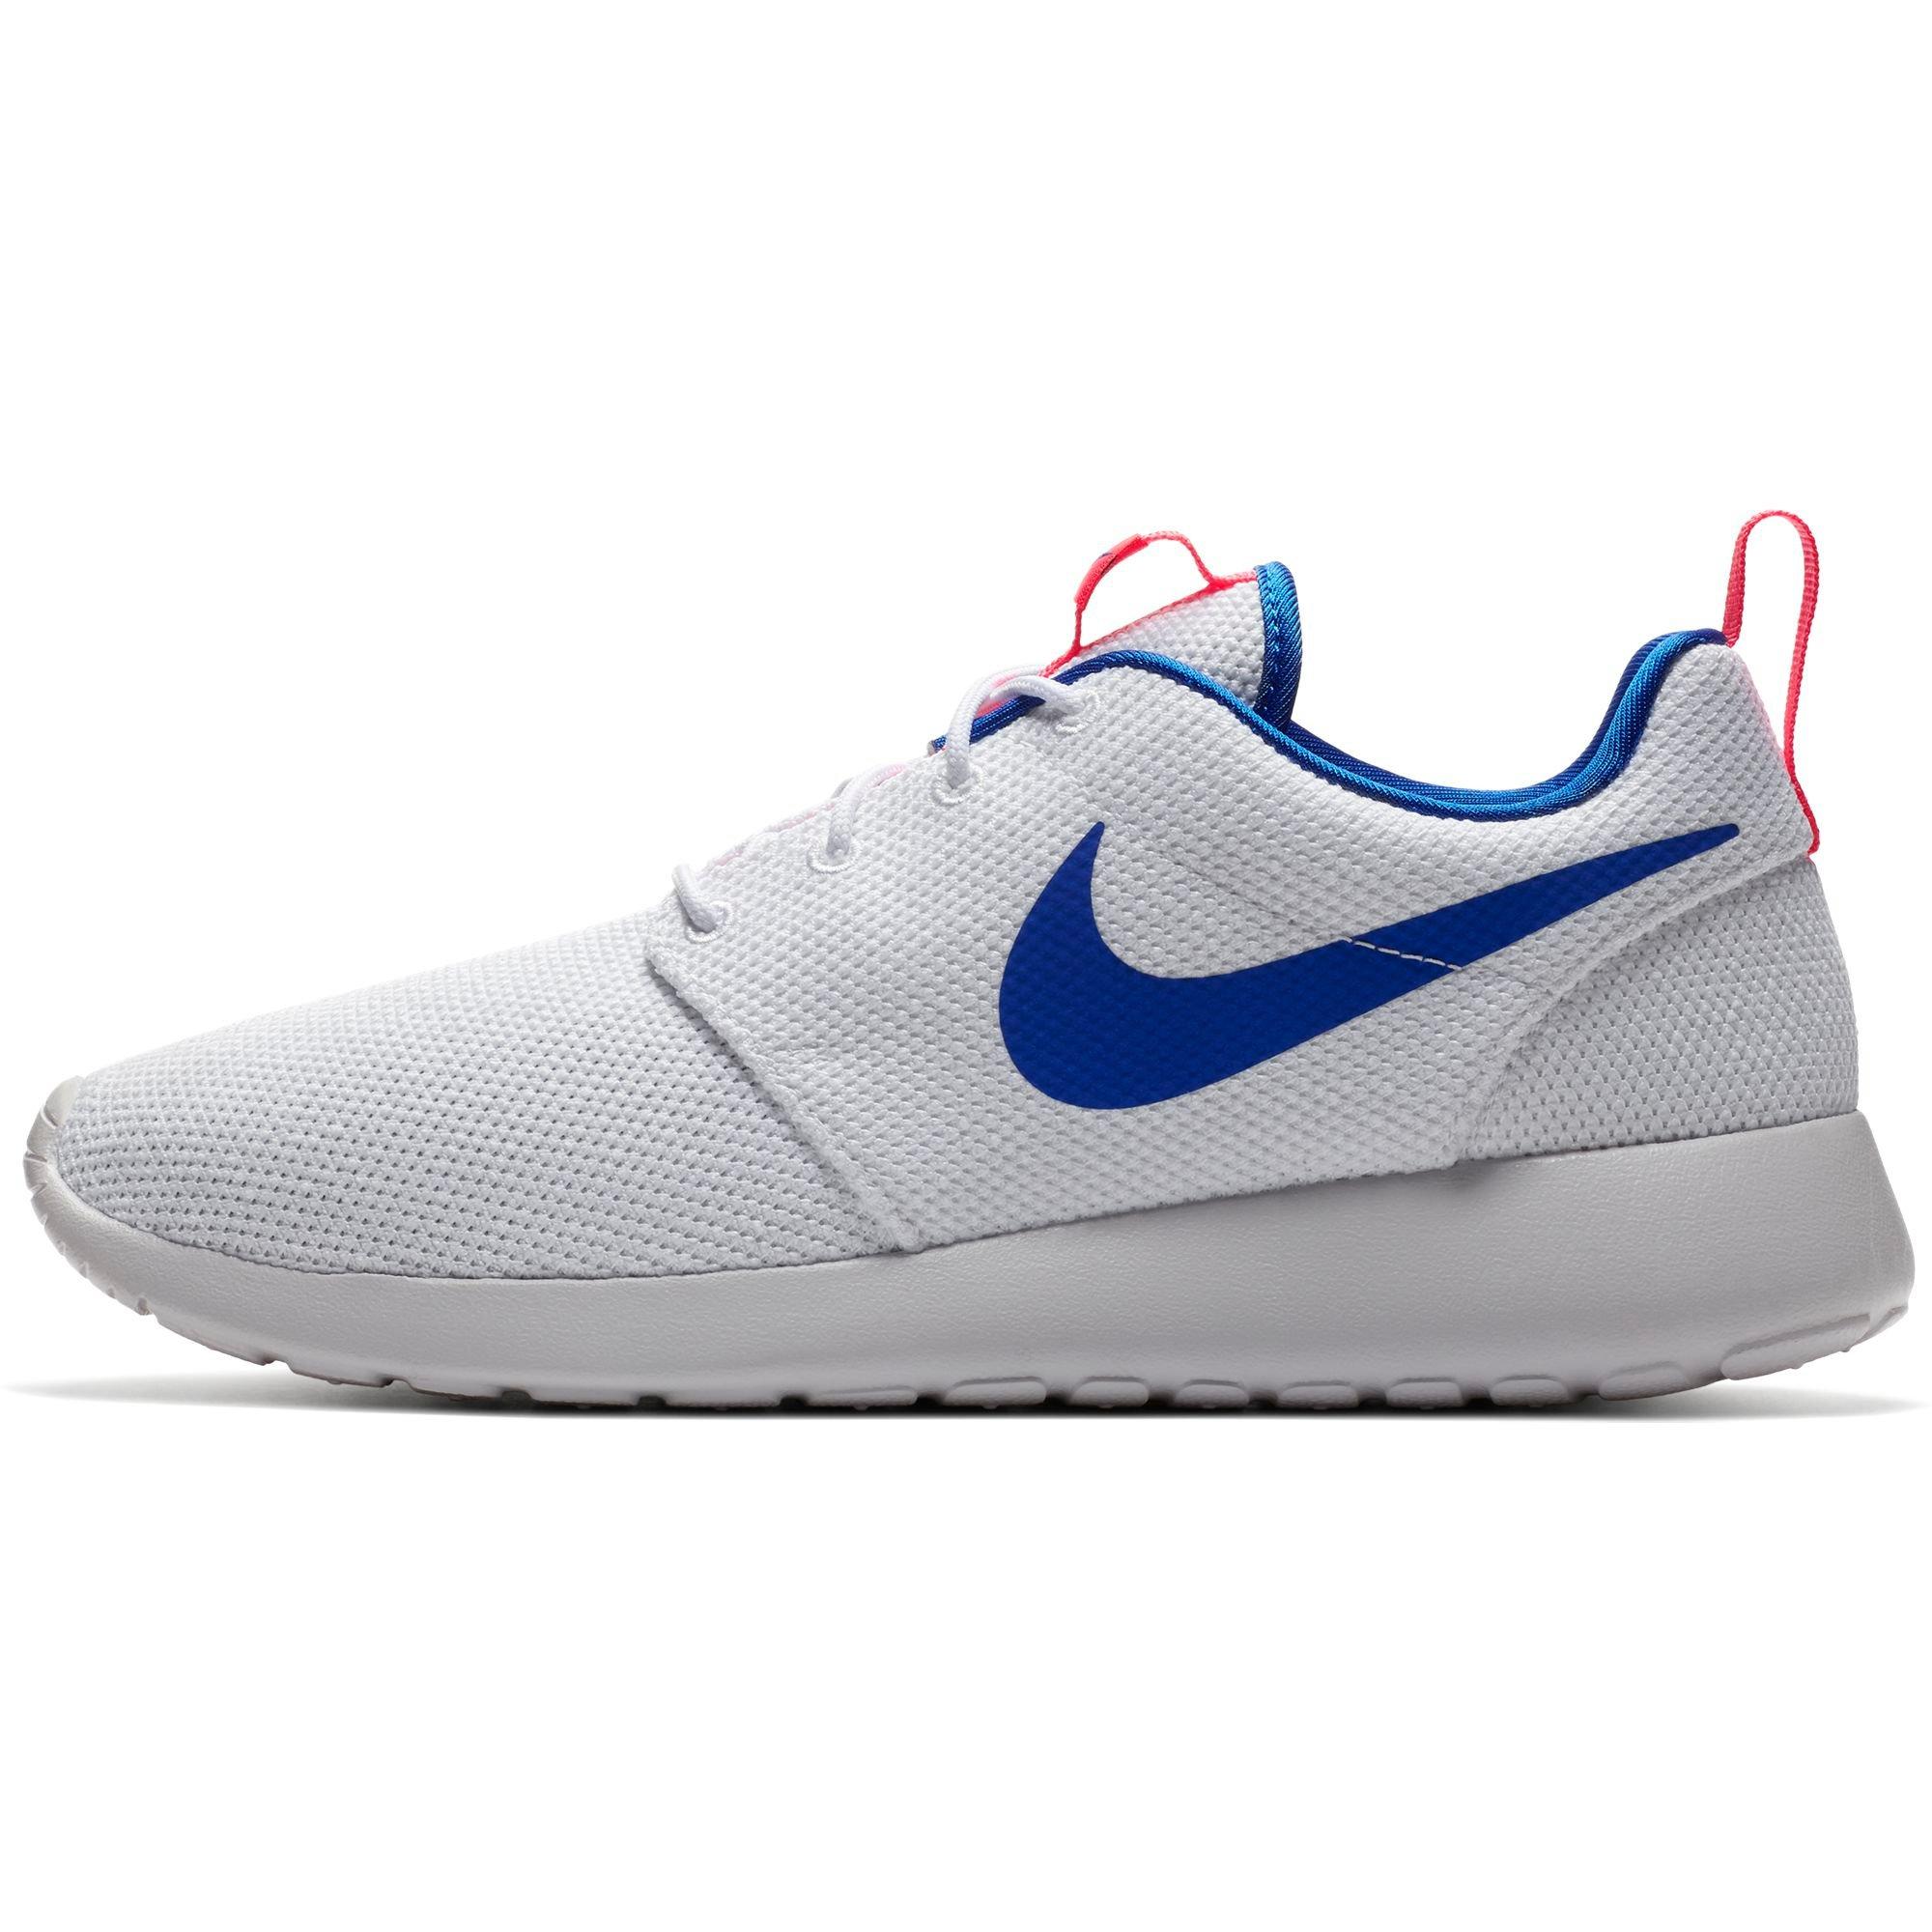 roshes red and blue